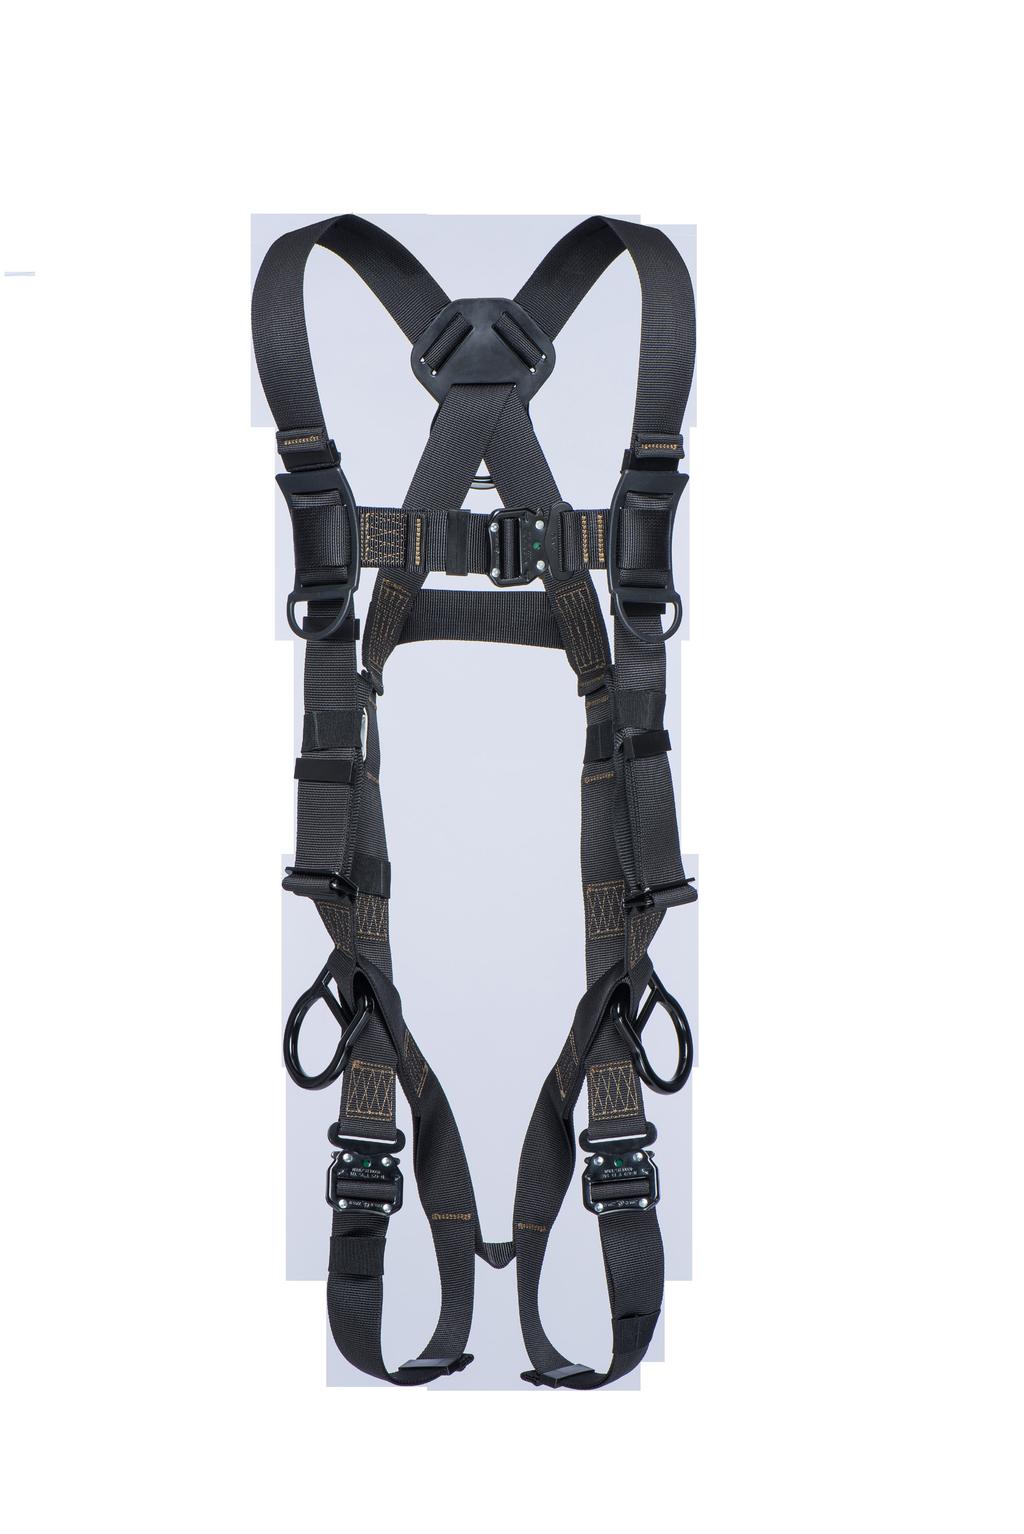 when it is not in use 3-BAR ADJUSTER BUCKLES Lightweight buckles allow for quick and easy adjustment REPEL LOOPS Sewn-in emergency decent control loops ADDITIONAL D-RINGS Allow this harness to be